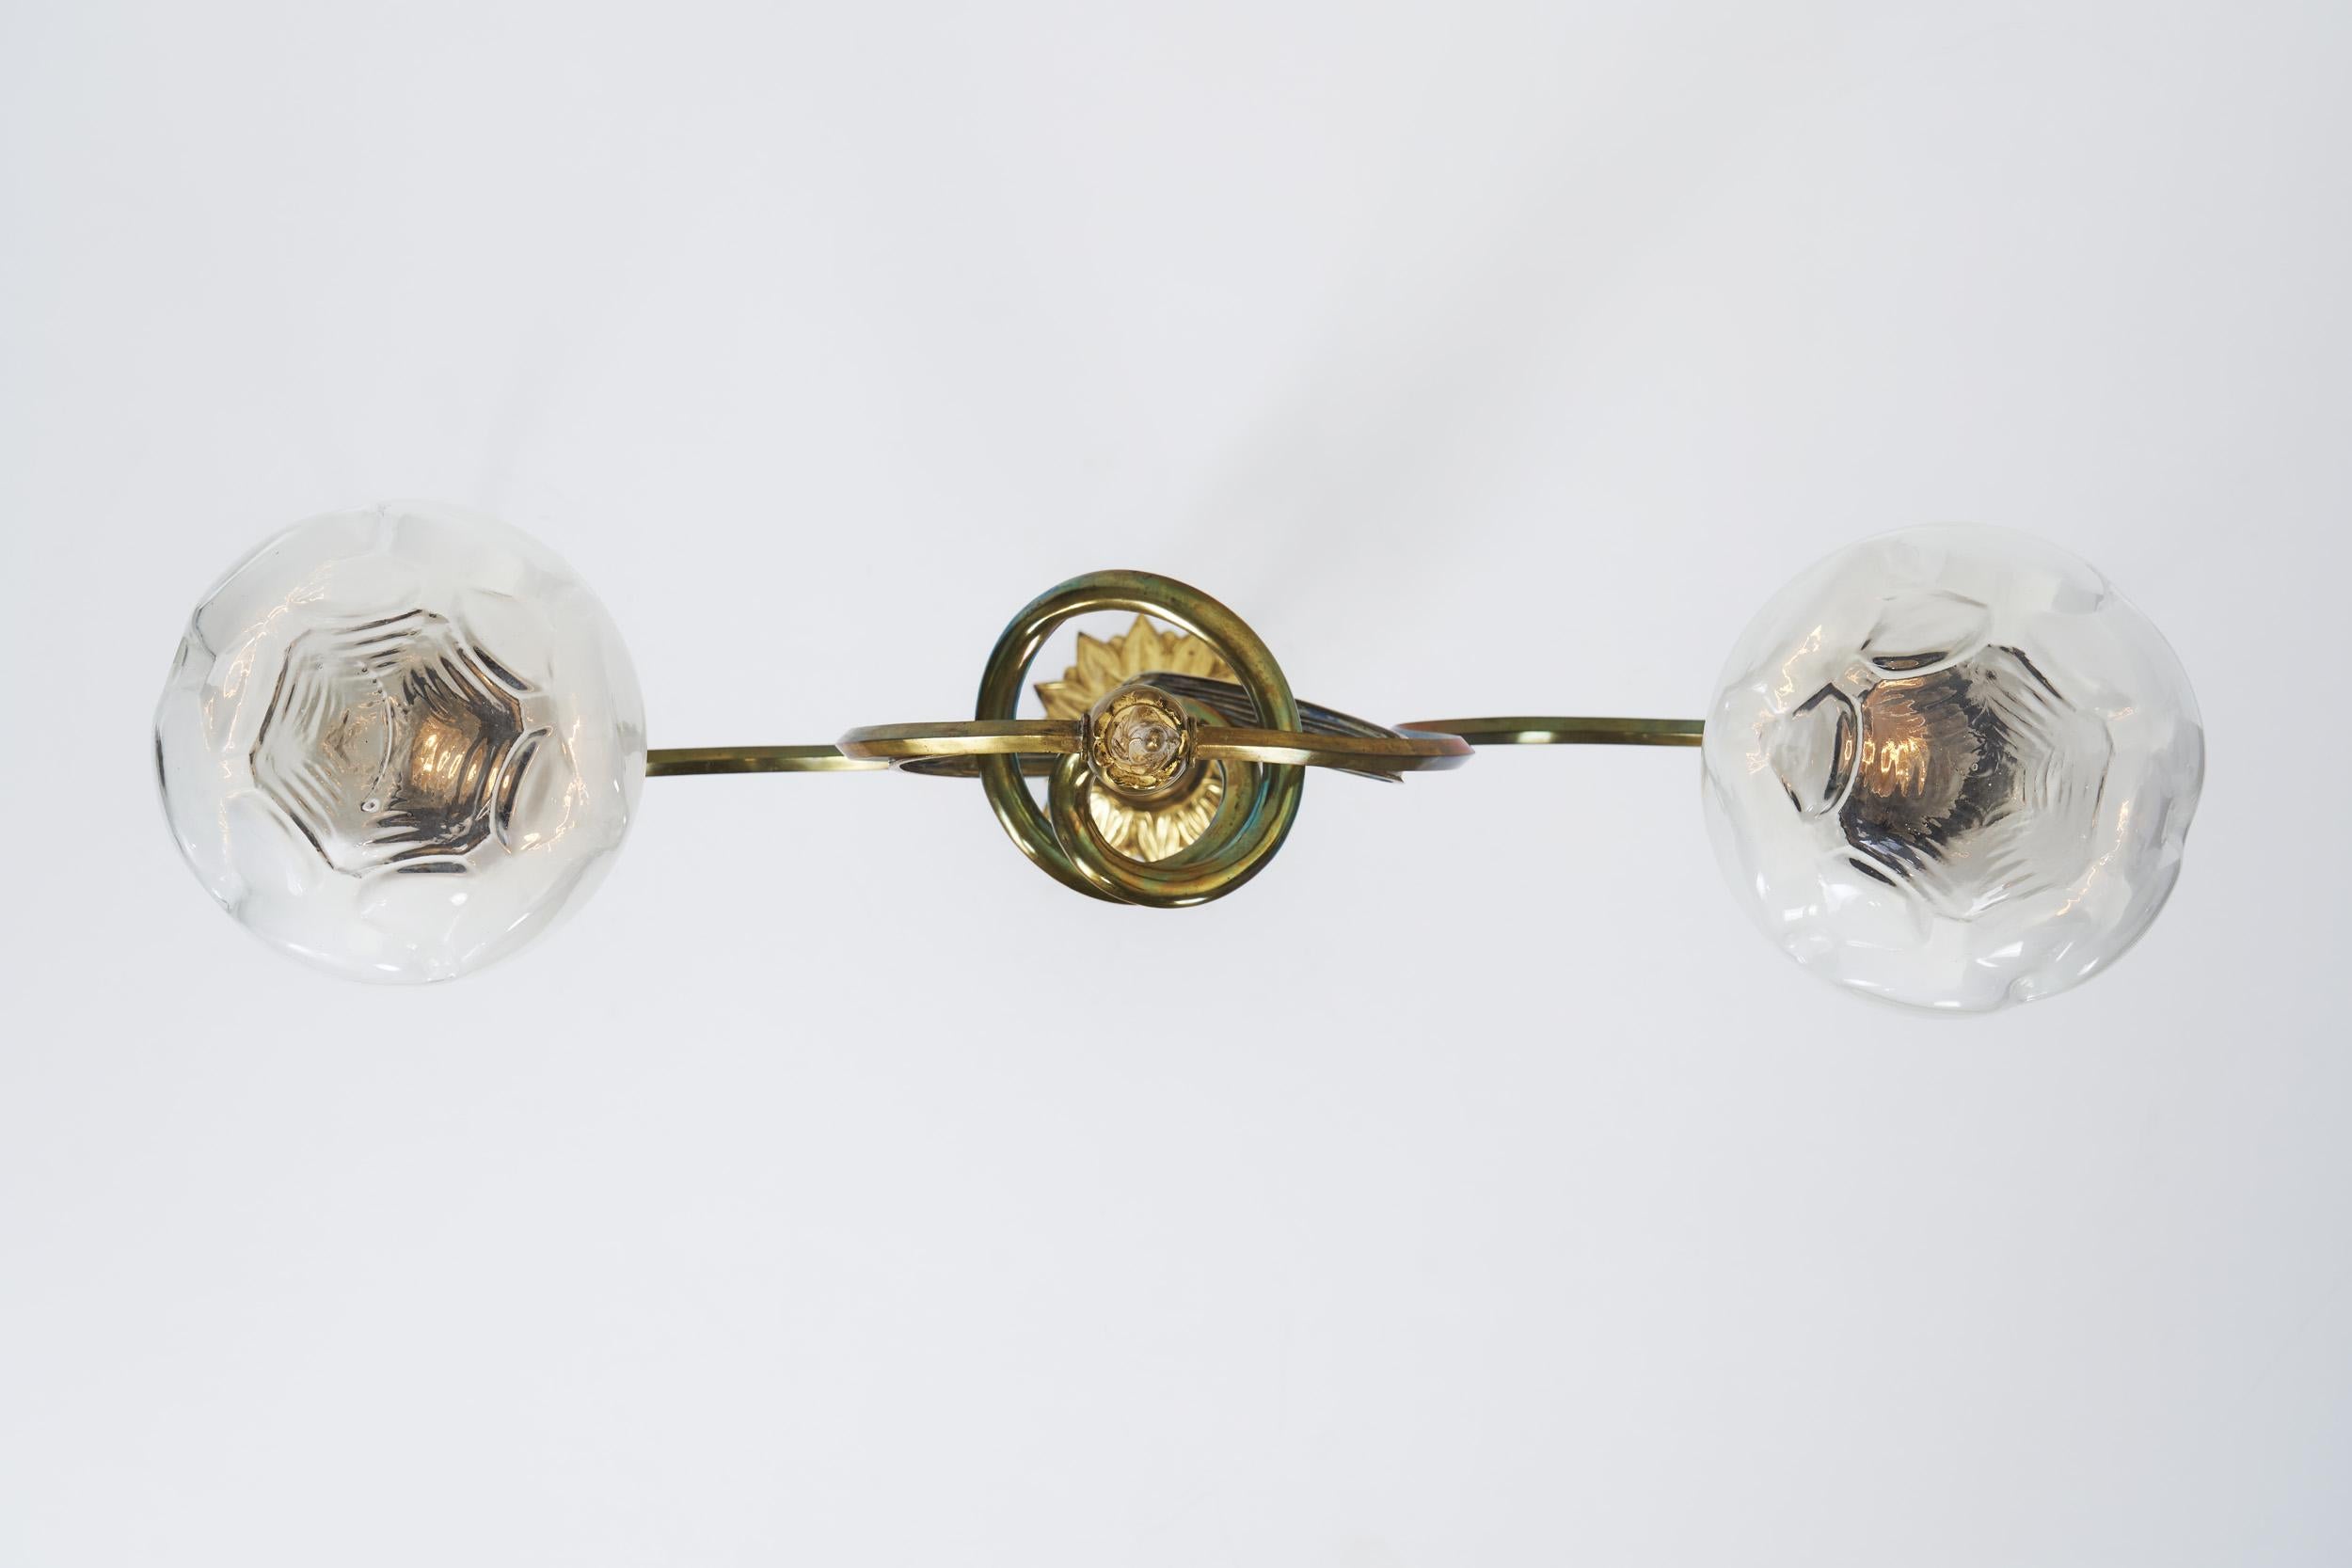 Jugend Ceiling Lamp in Patinated Brass and Glass, Europe early 20th century For Sale 5